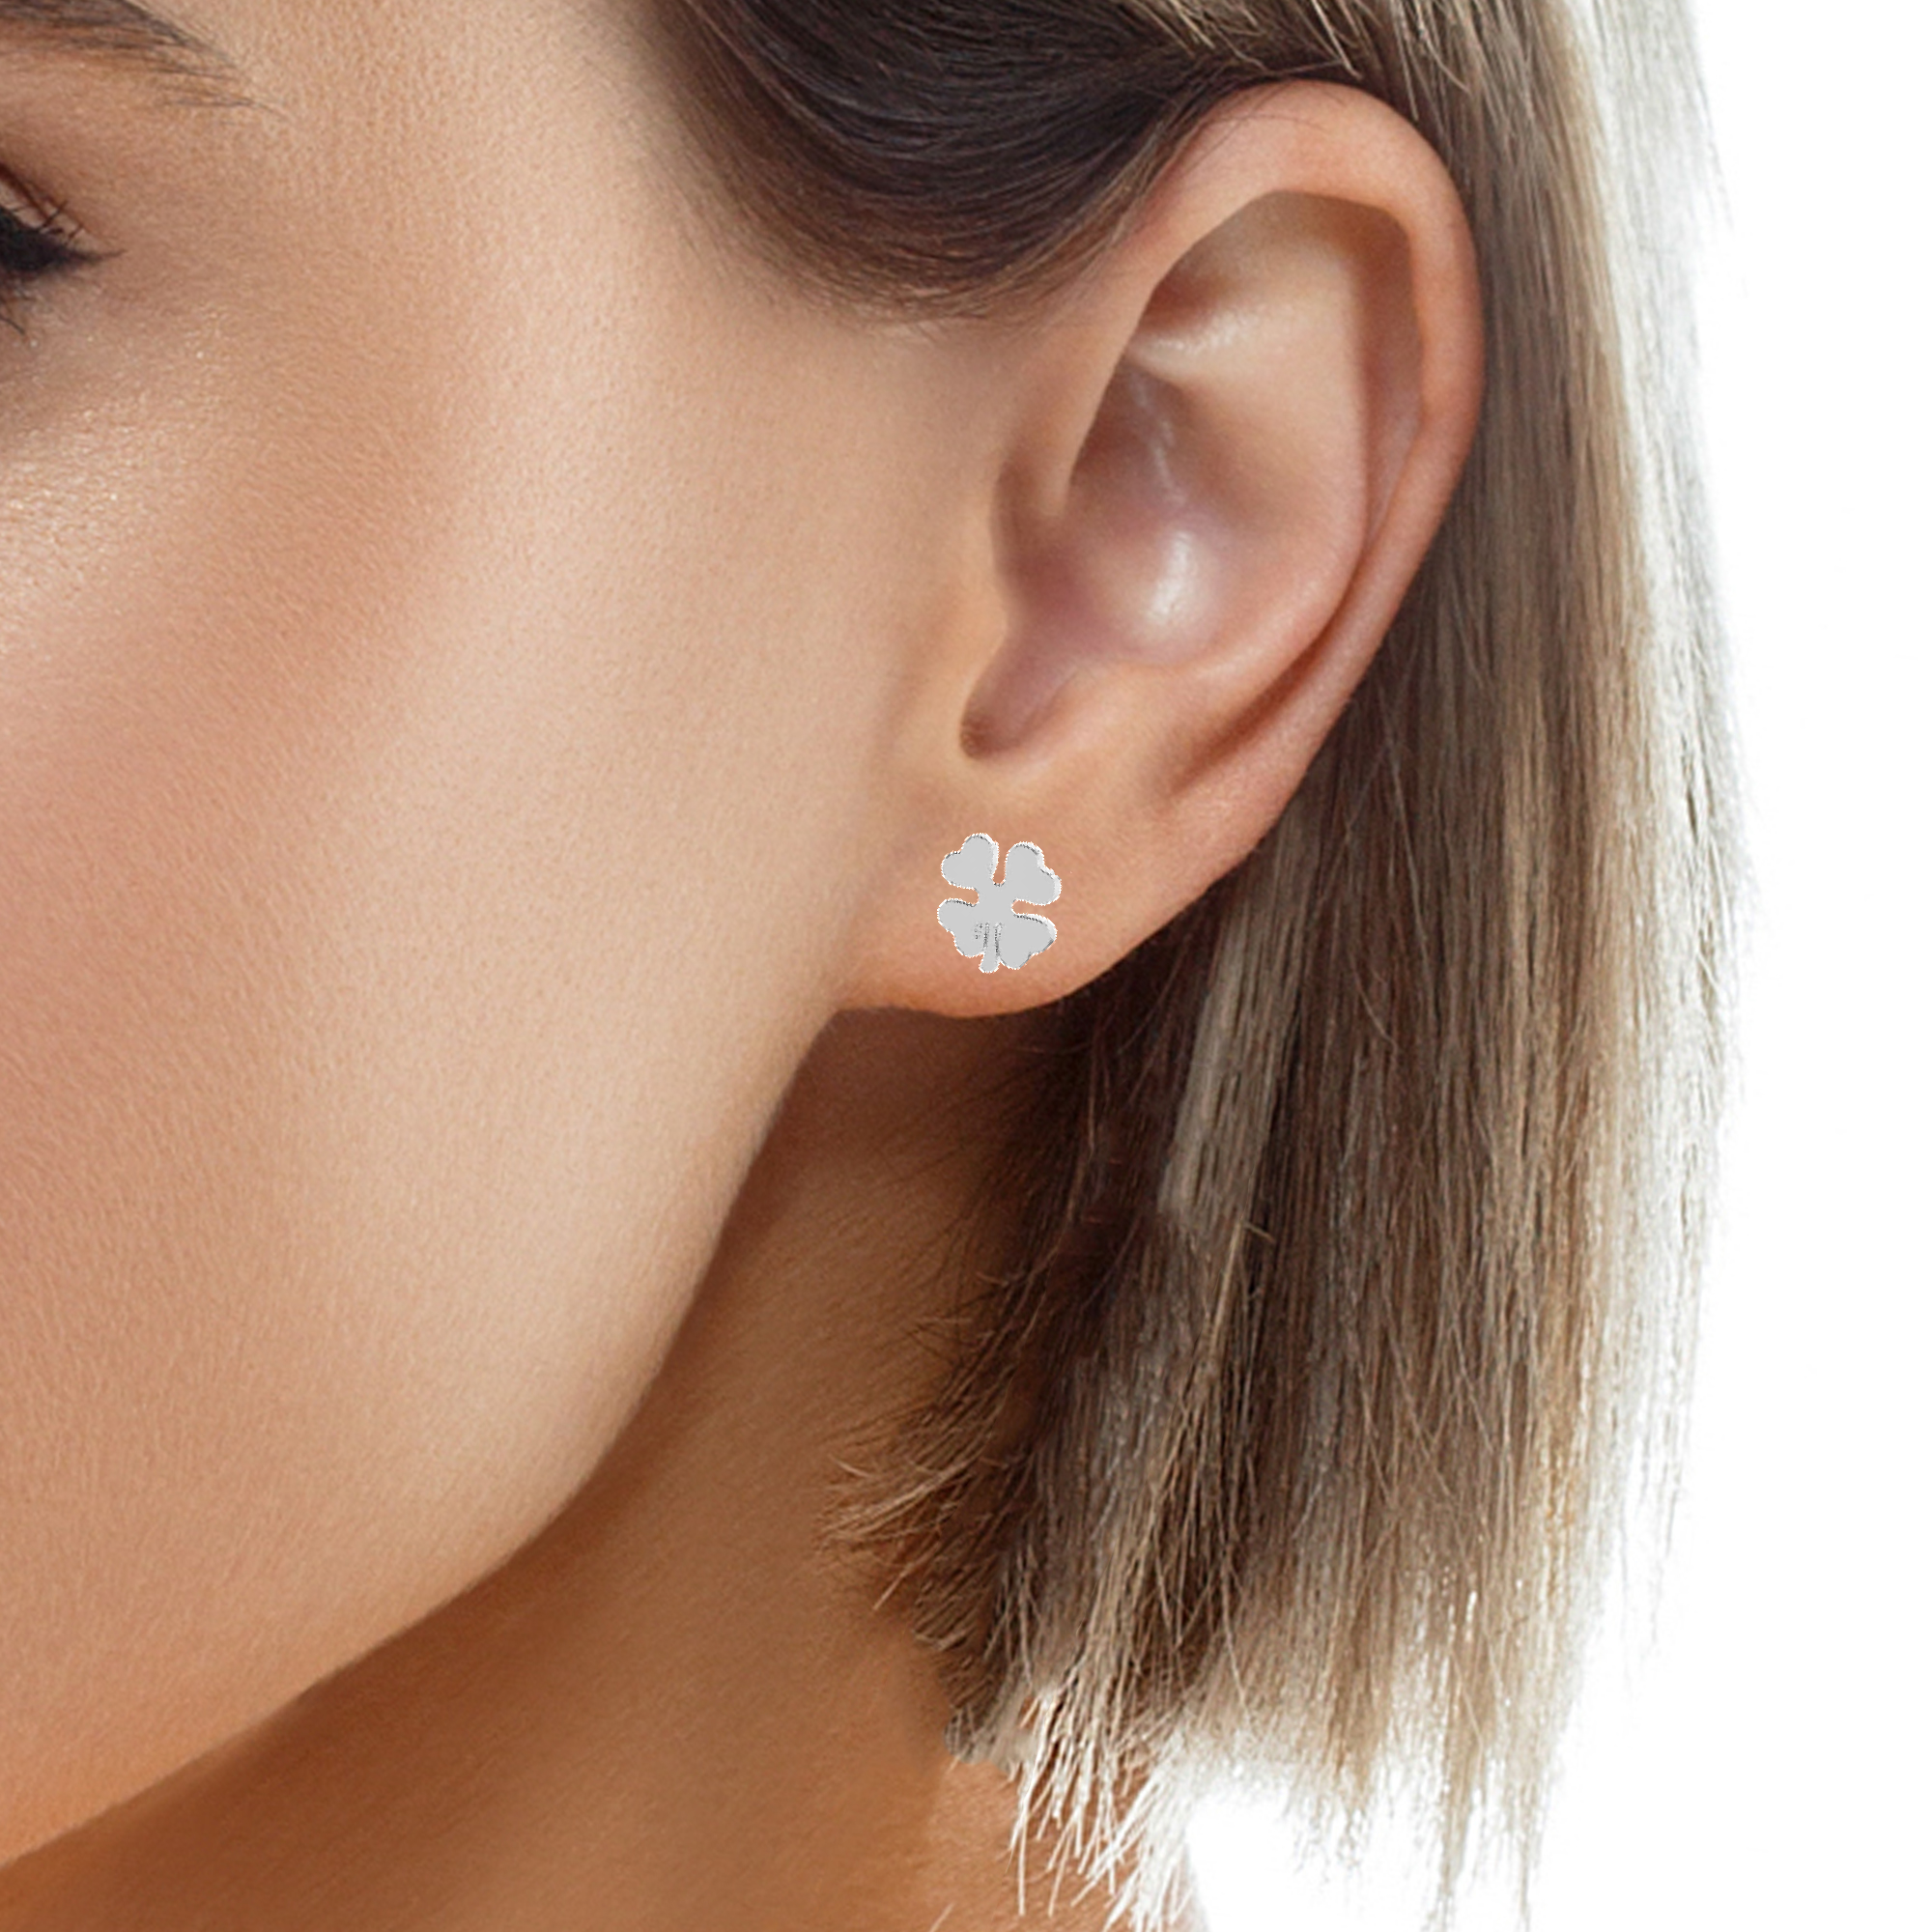 Four-Leaf Clover Silver Stud Earrings worn by a model, showing the delicate and sophisticated look.